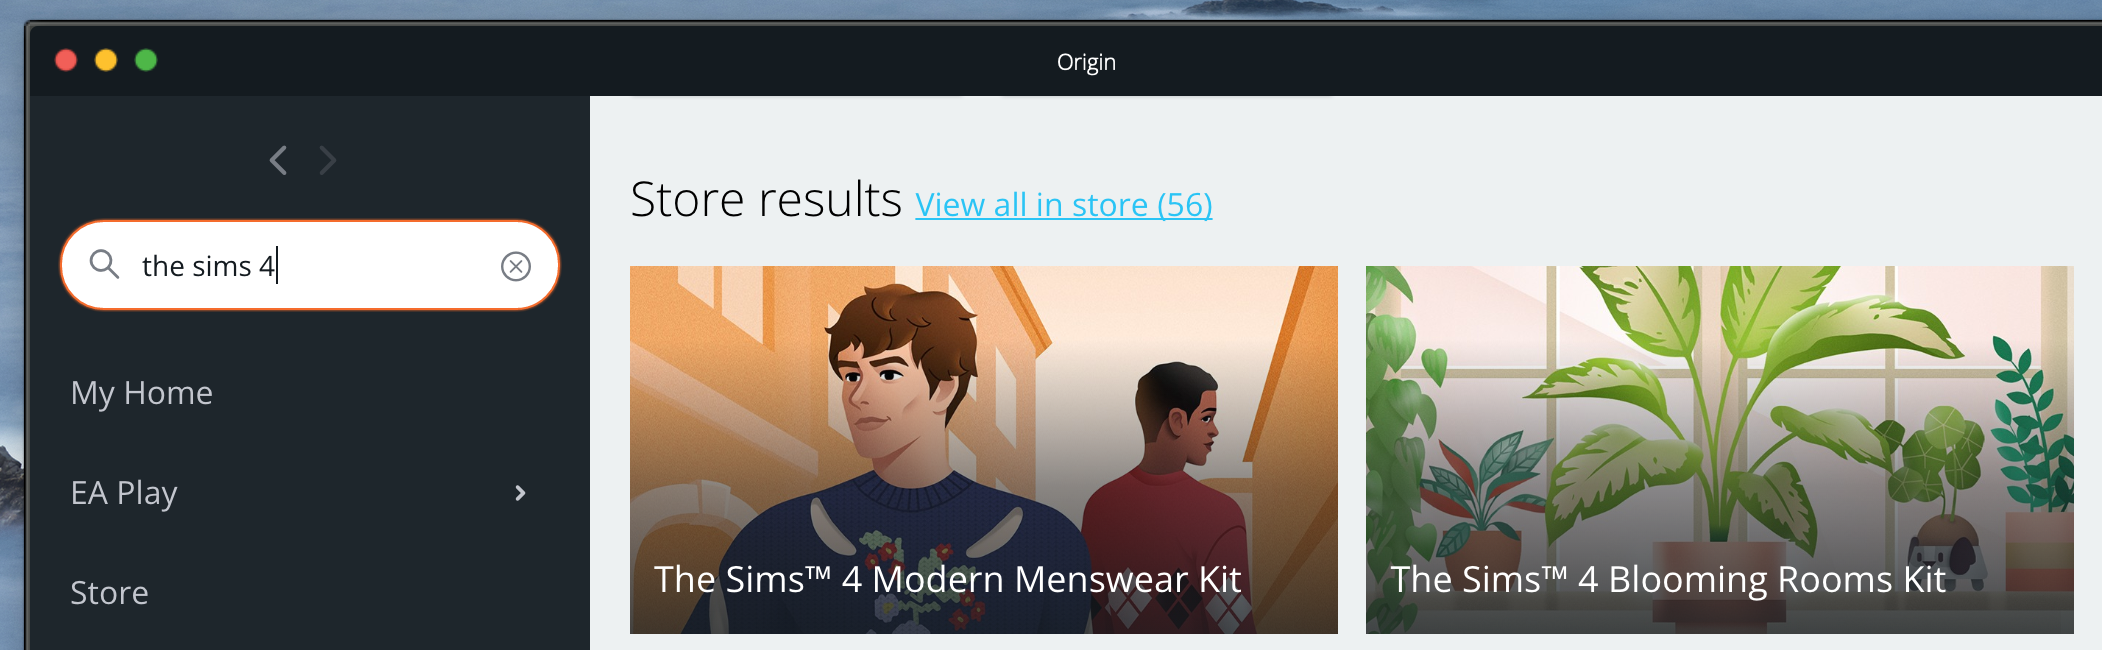 The Sims 4: How to Get the Base Game for Free on PC, Mac